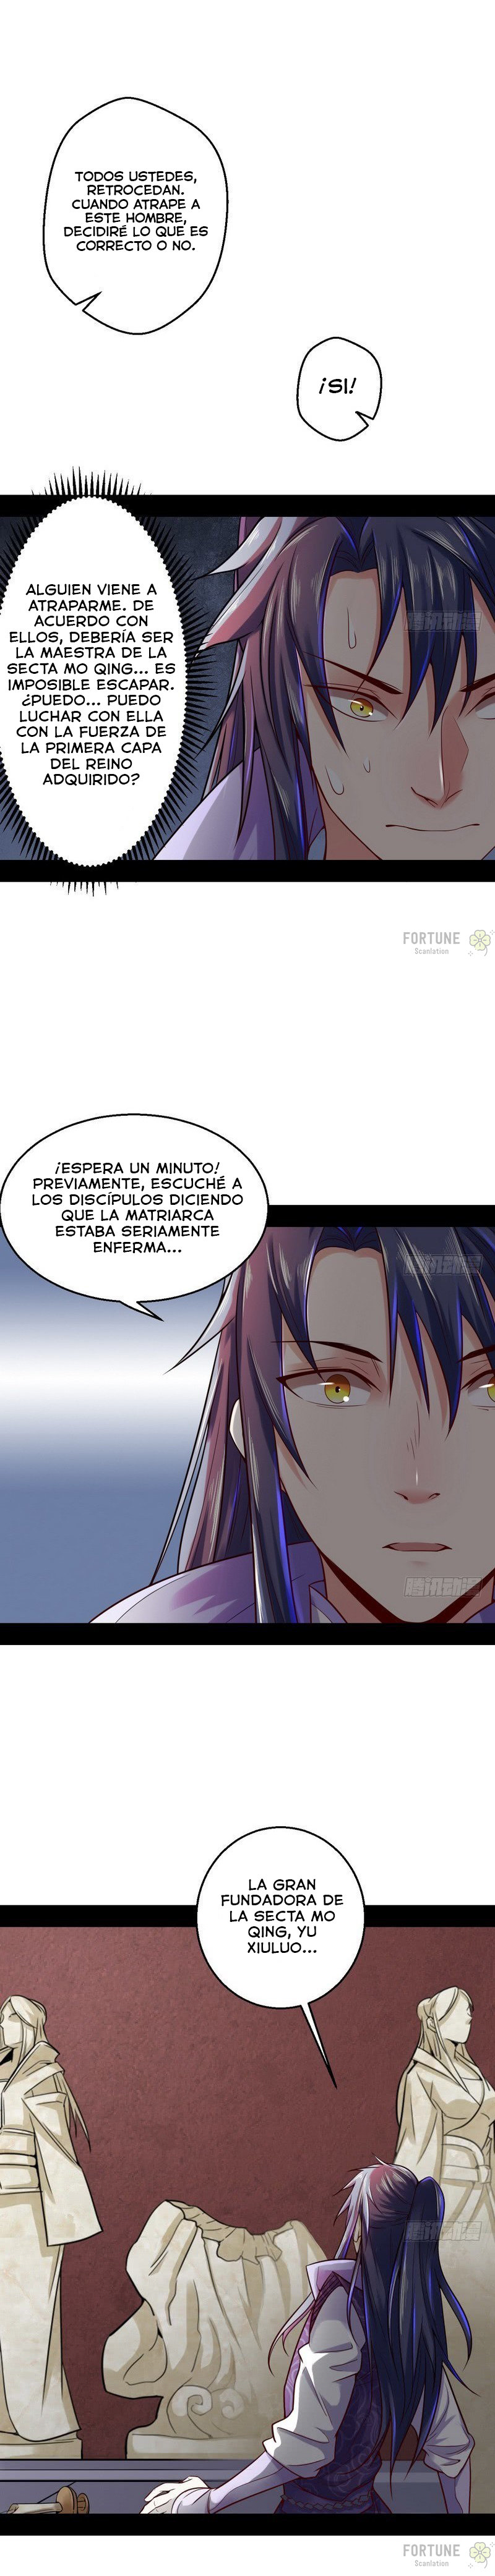 Manga Soy un dios maligno Chapter 8 image number 13